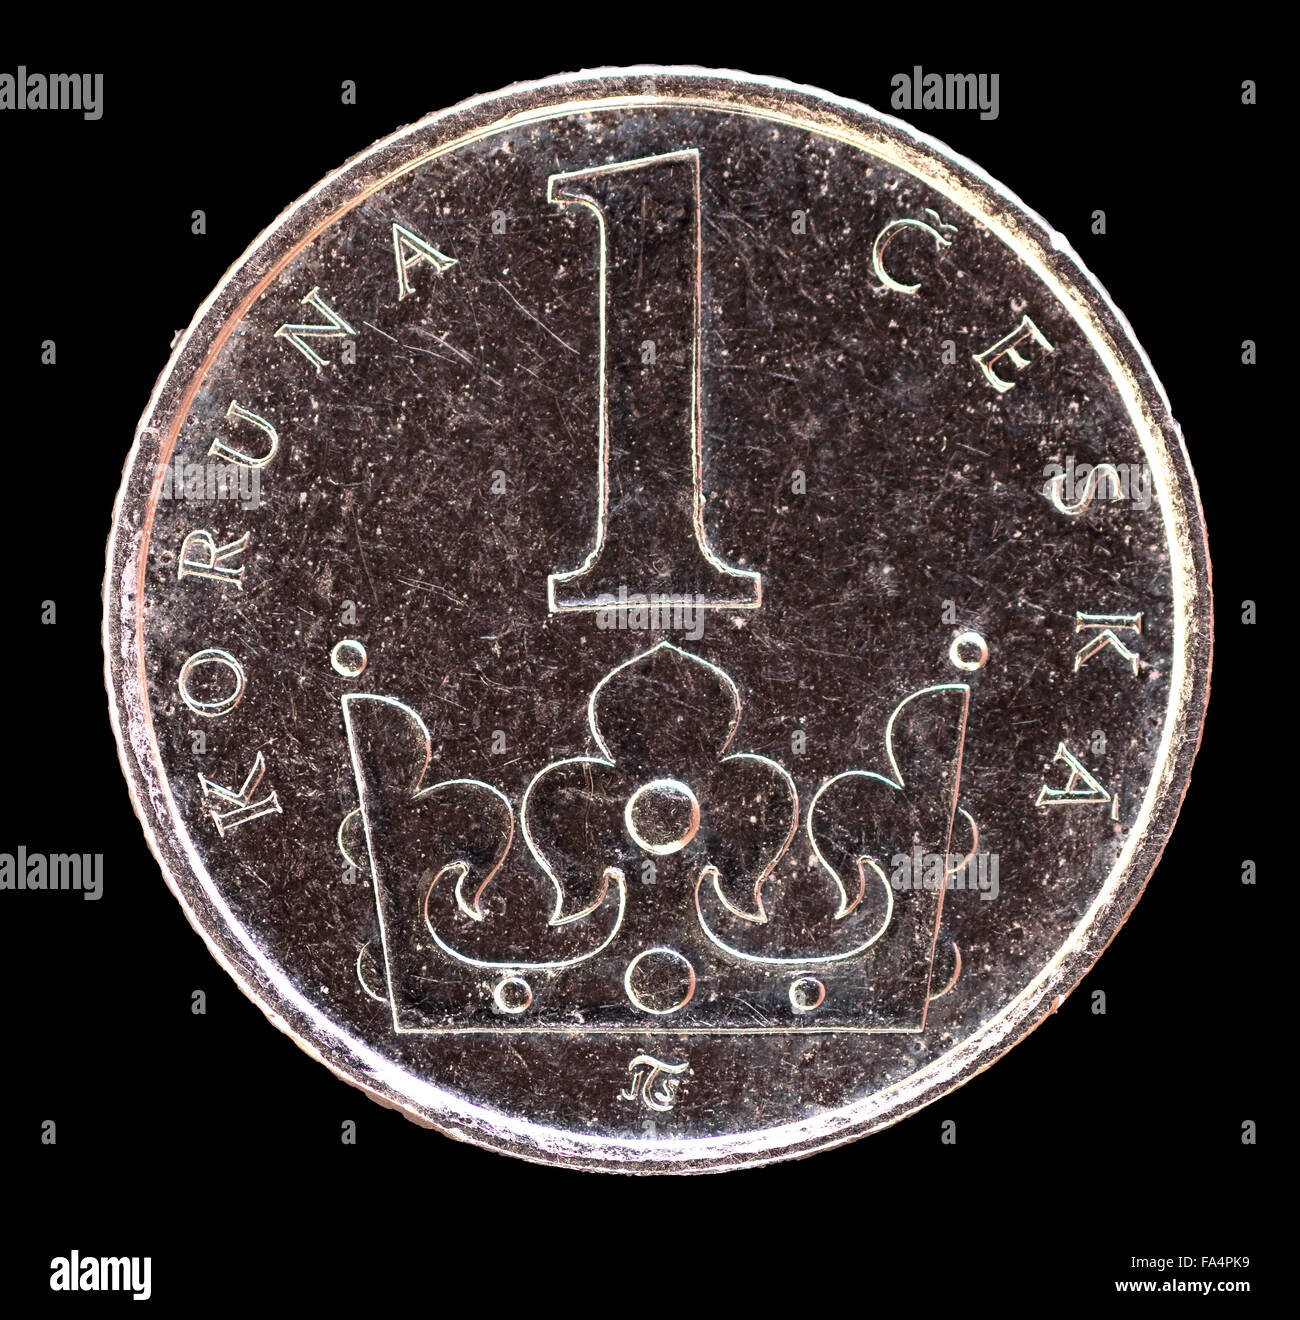 The tail face of one koruna coin, issued by Czech Republic in 2009, depicting a crown. Image isolated on black background Stock Photo